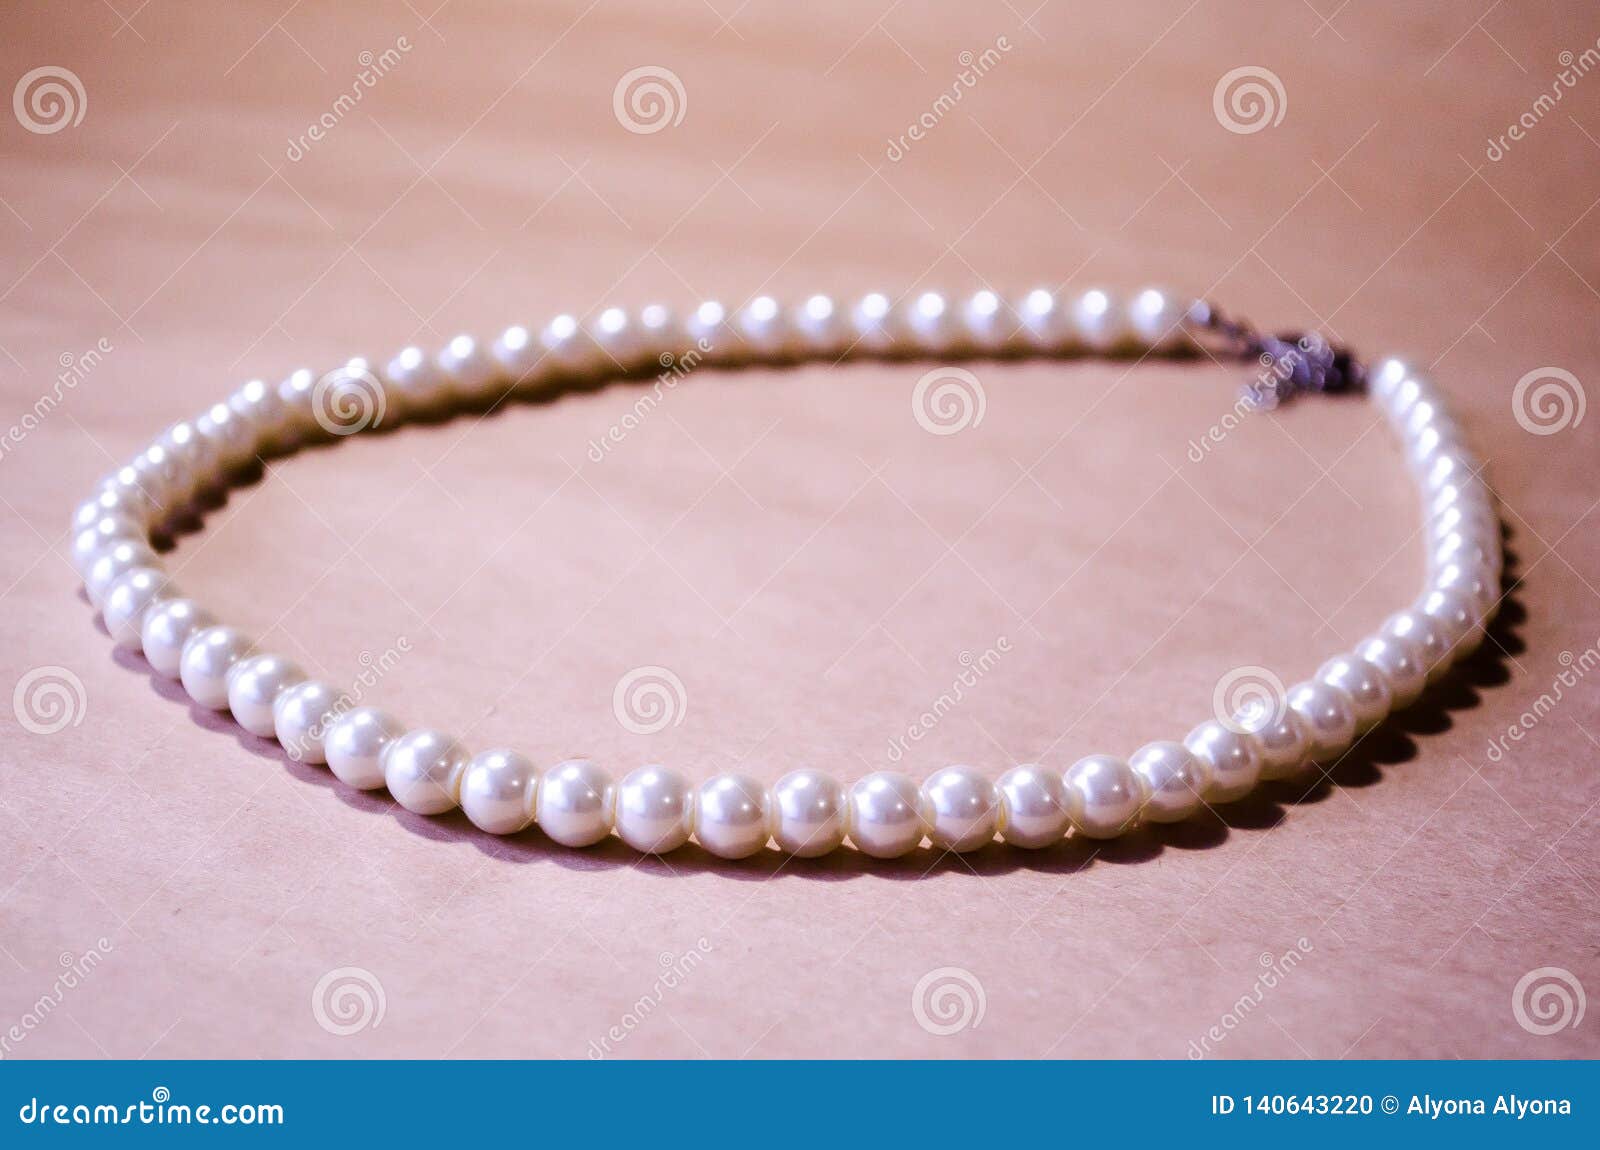 Jewelry, Women Necklace Fake Pearls Like New